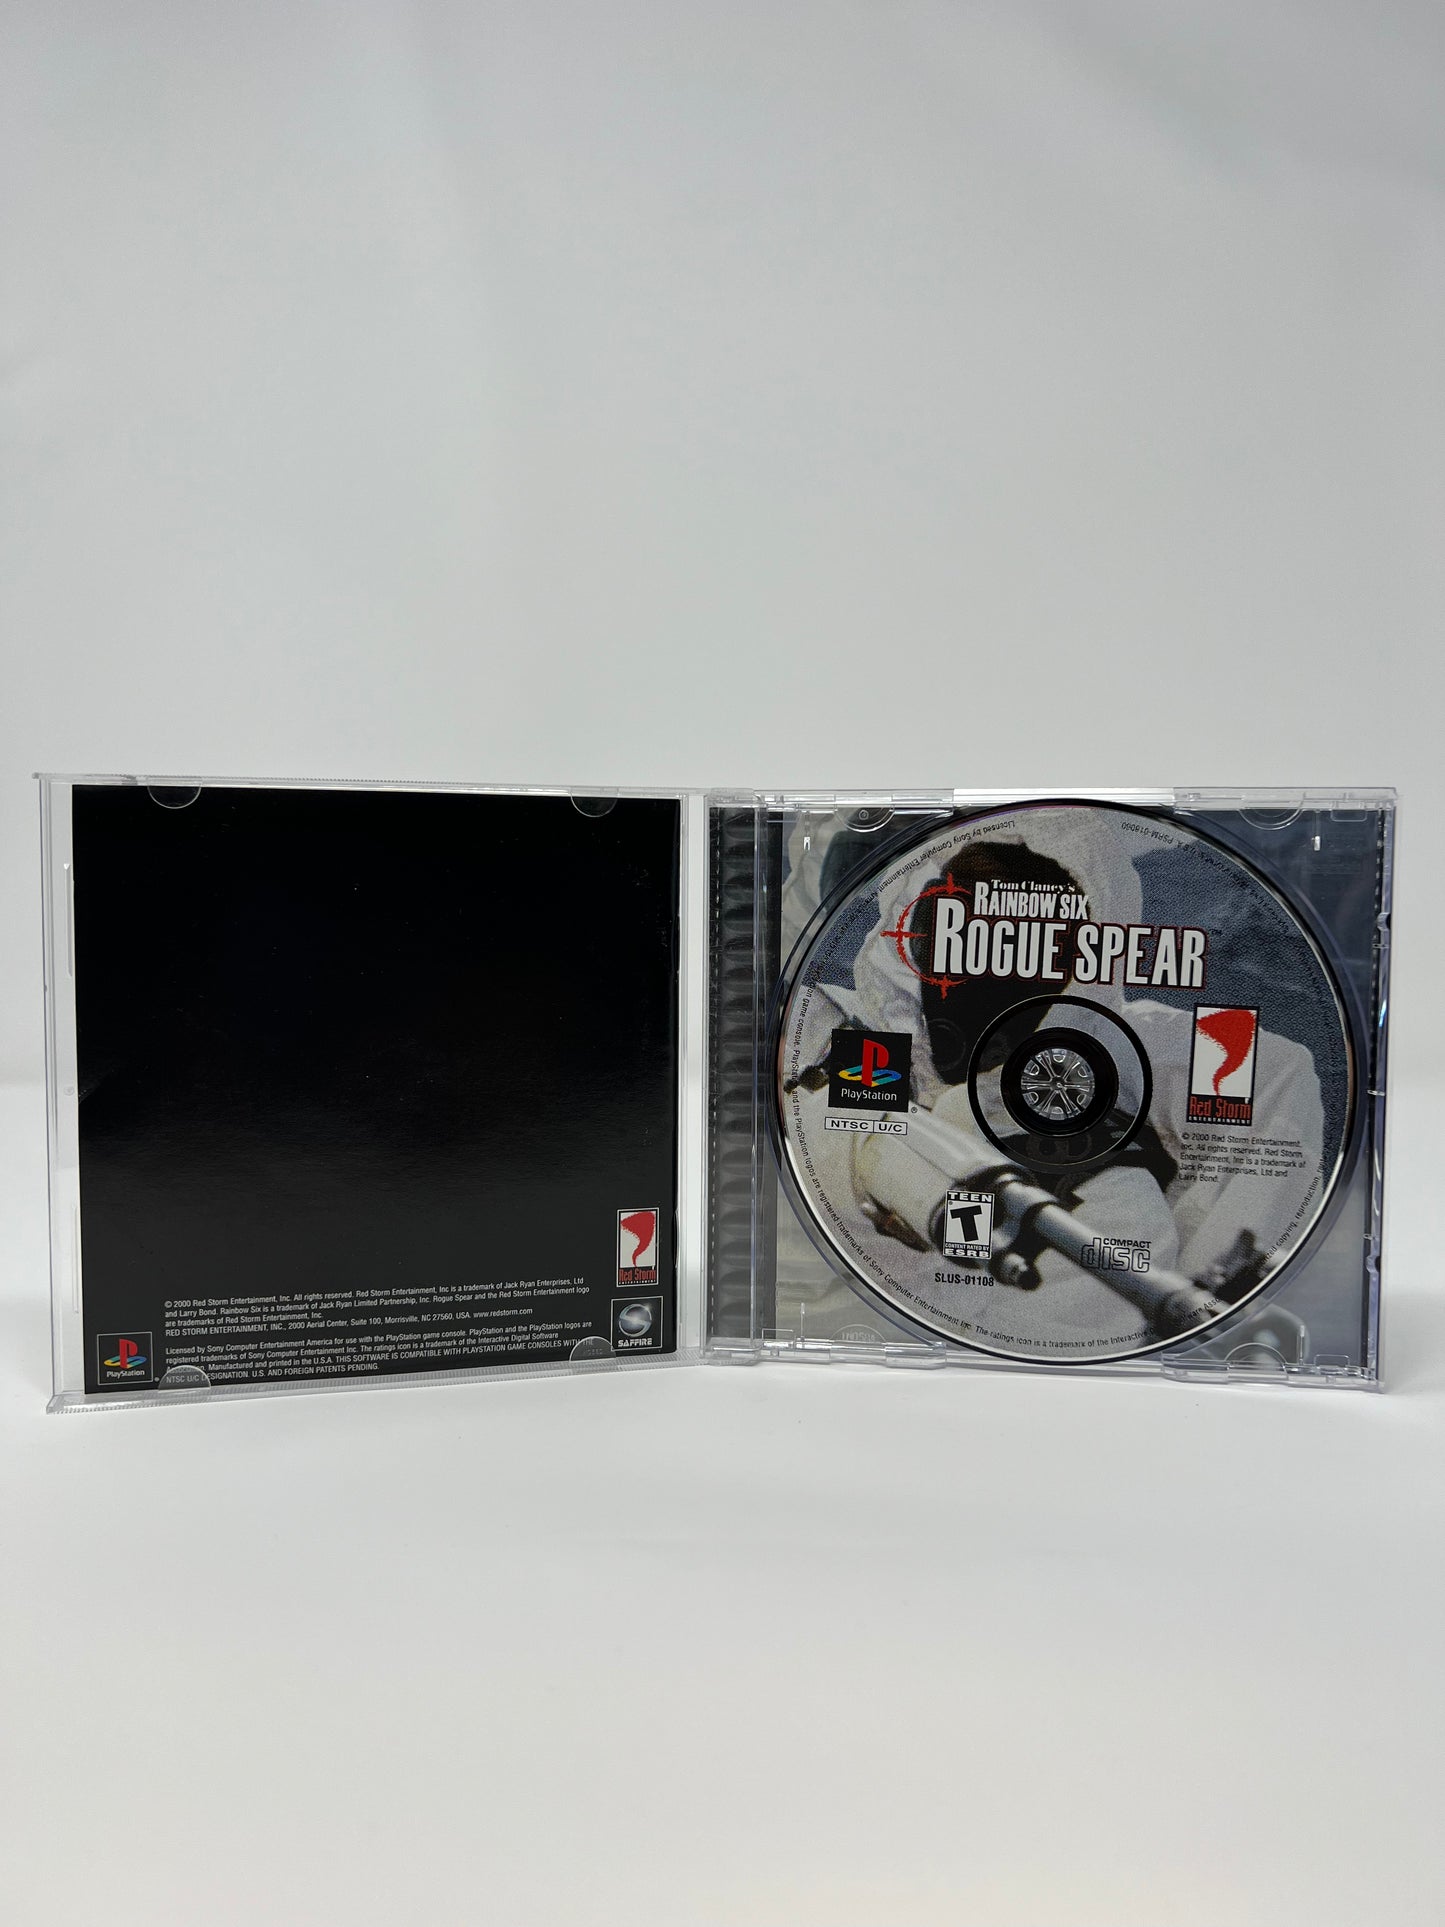 Tom Clancy's Rainbow Six Rouge Spear - PS1 Game - Used